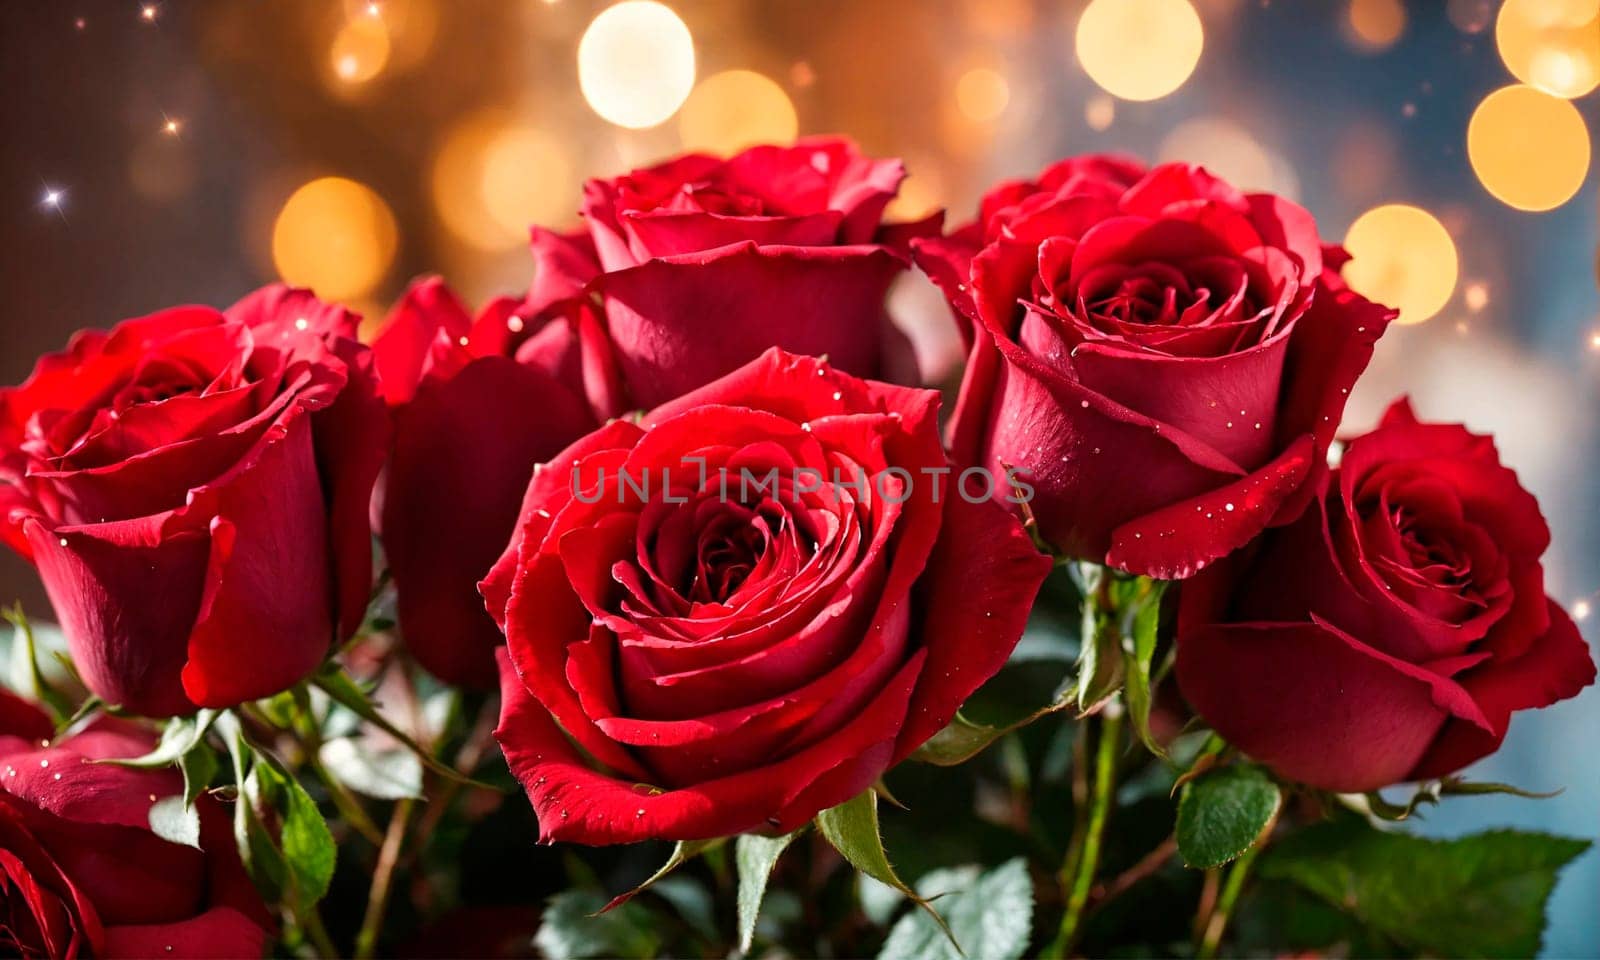 bouquet of beautiful red roses. Selective focus. by yanadjana